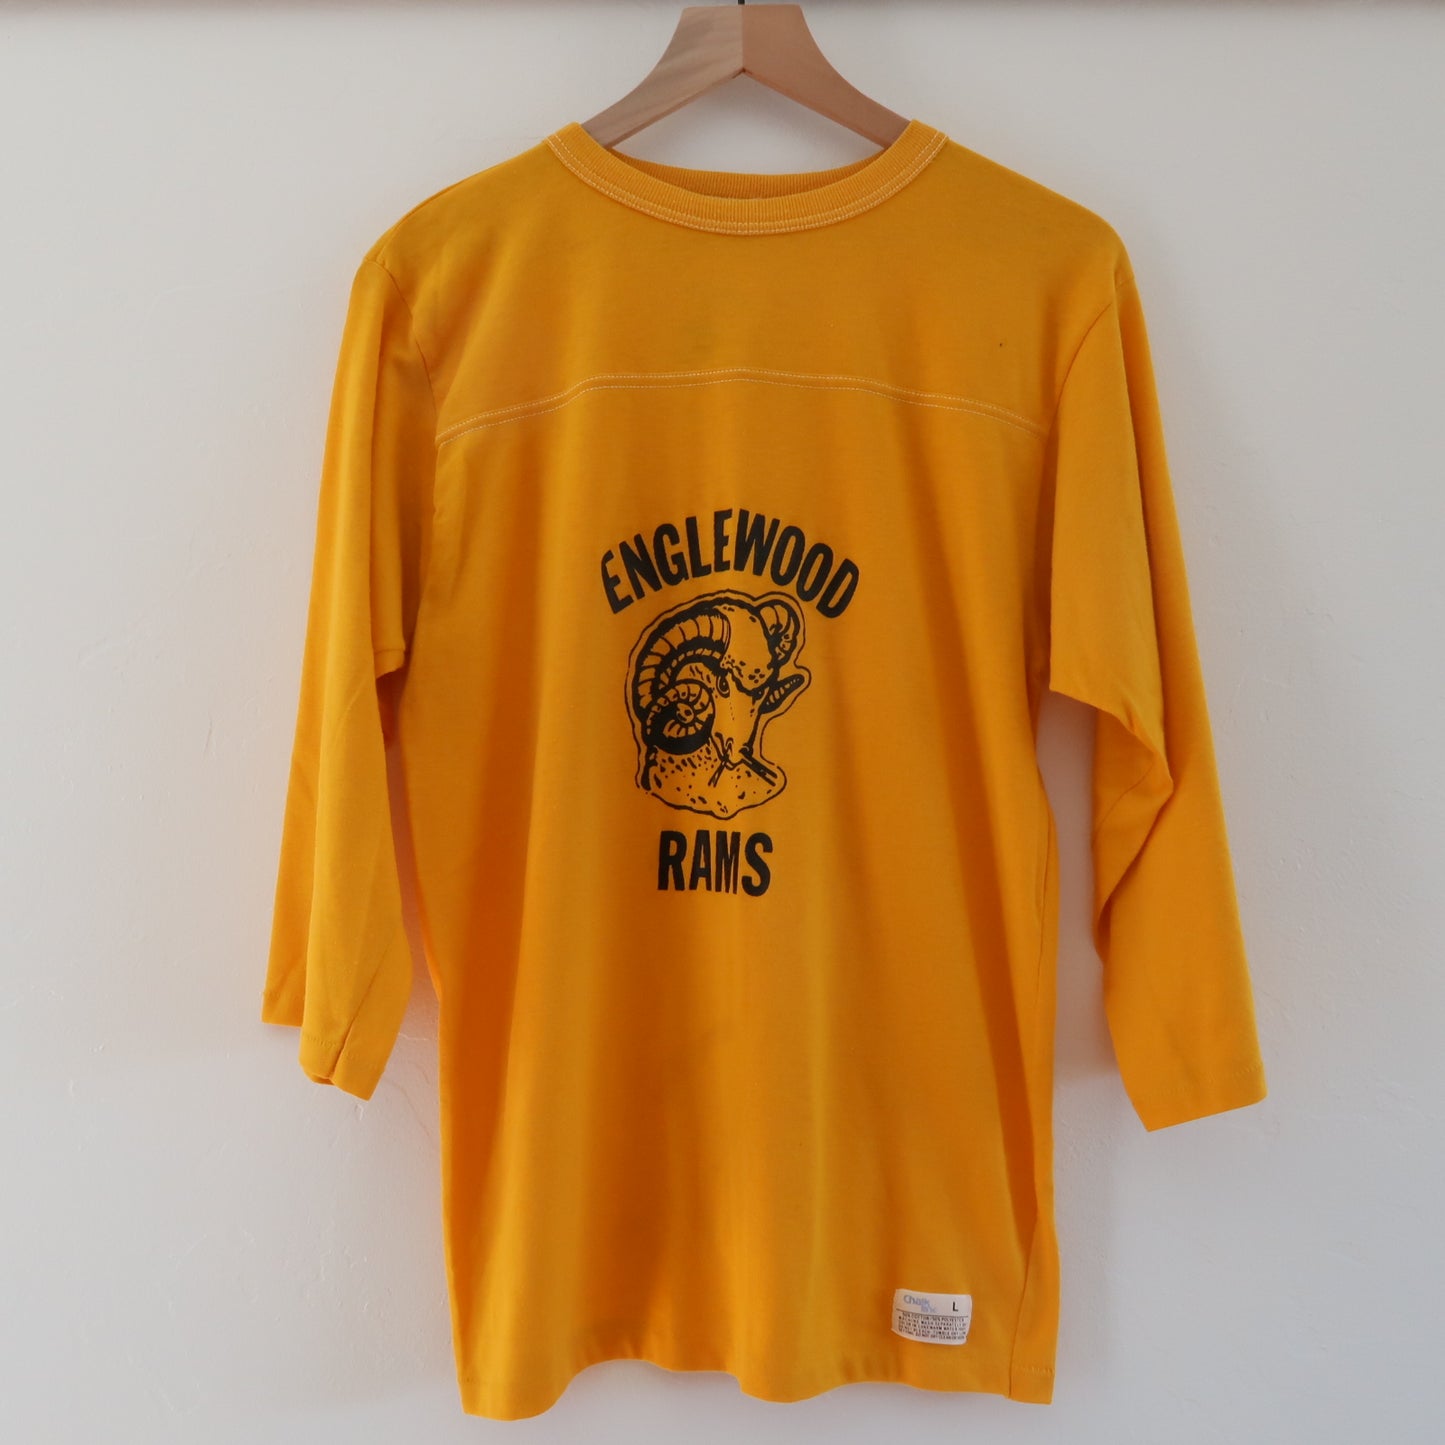 1970s Englewood Rams Jersey T Shirt Size M